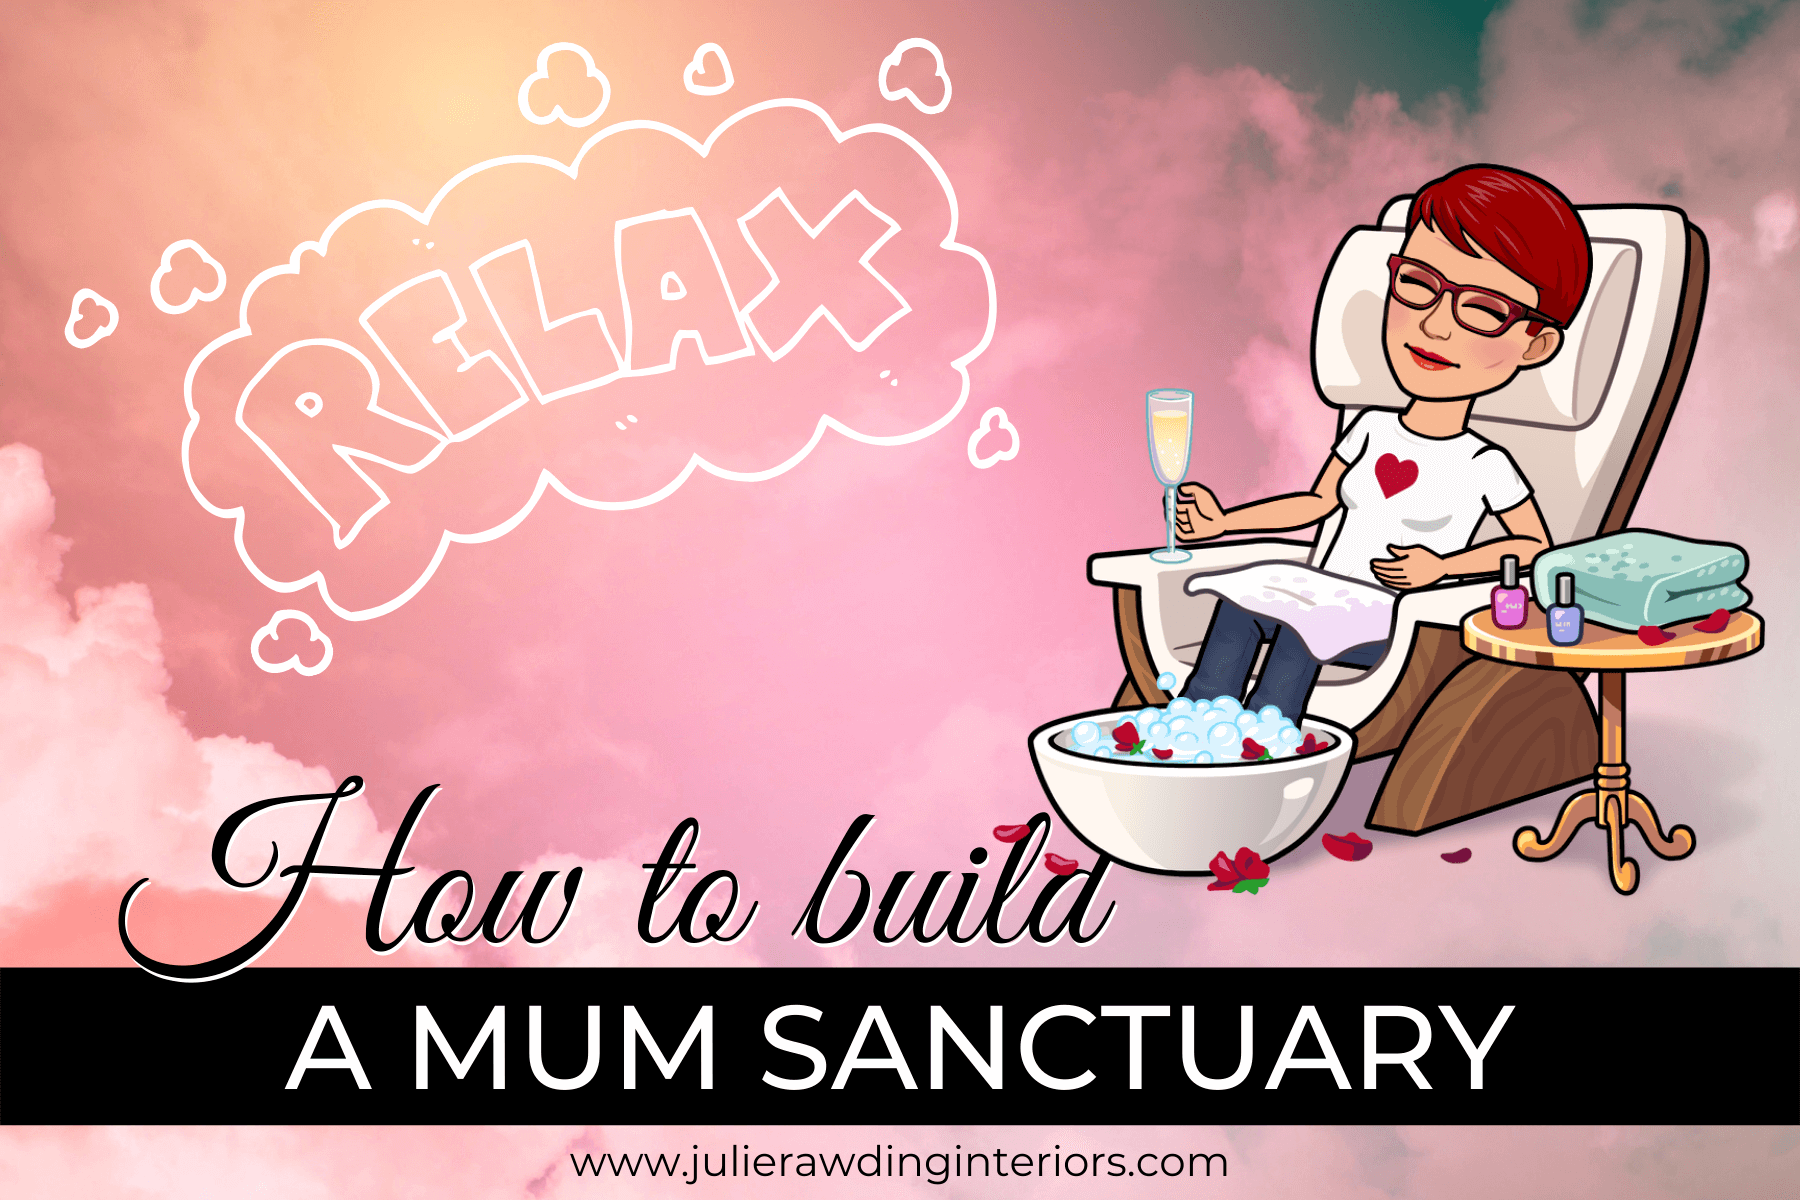 relaxing and calming home environment - mum sanctuary